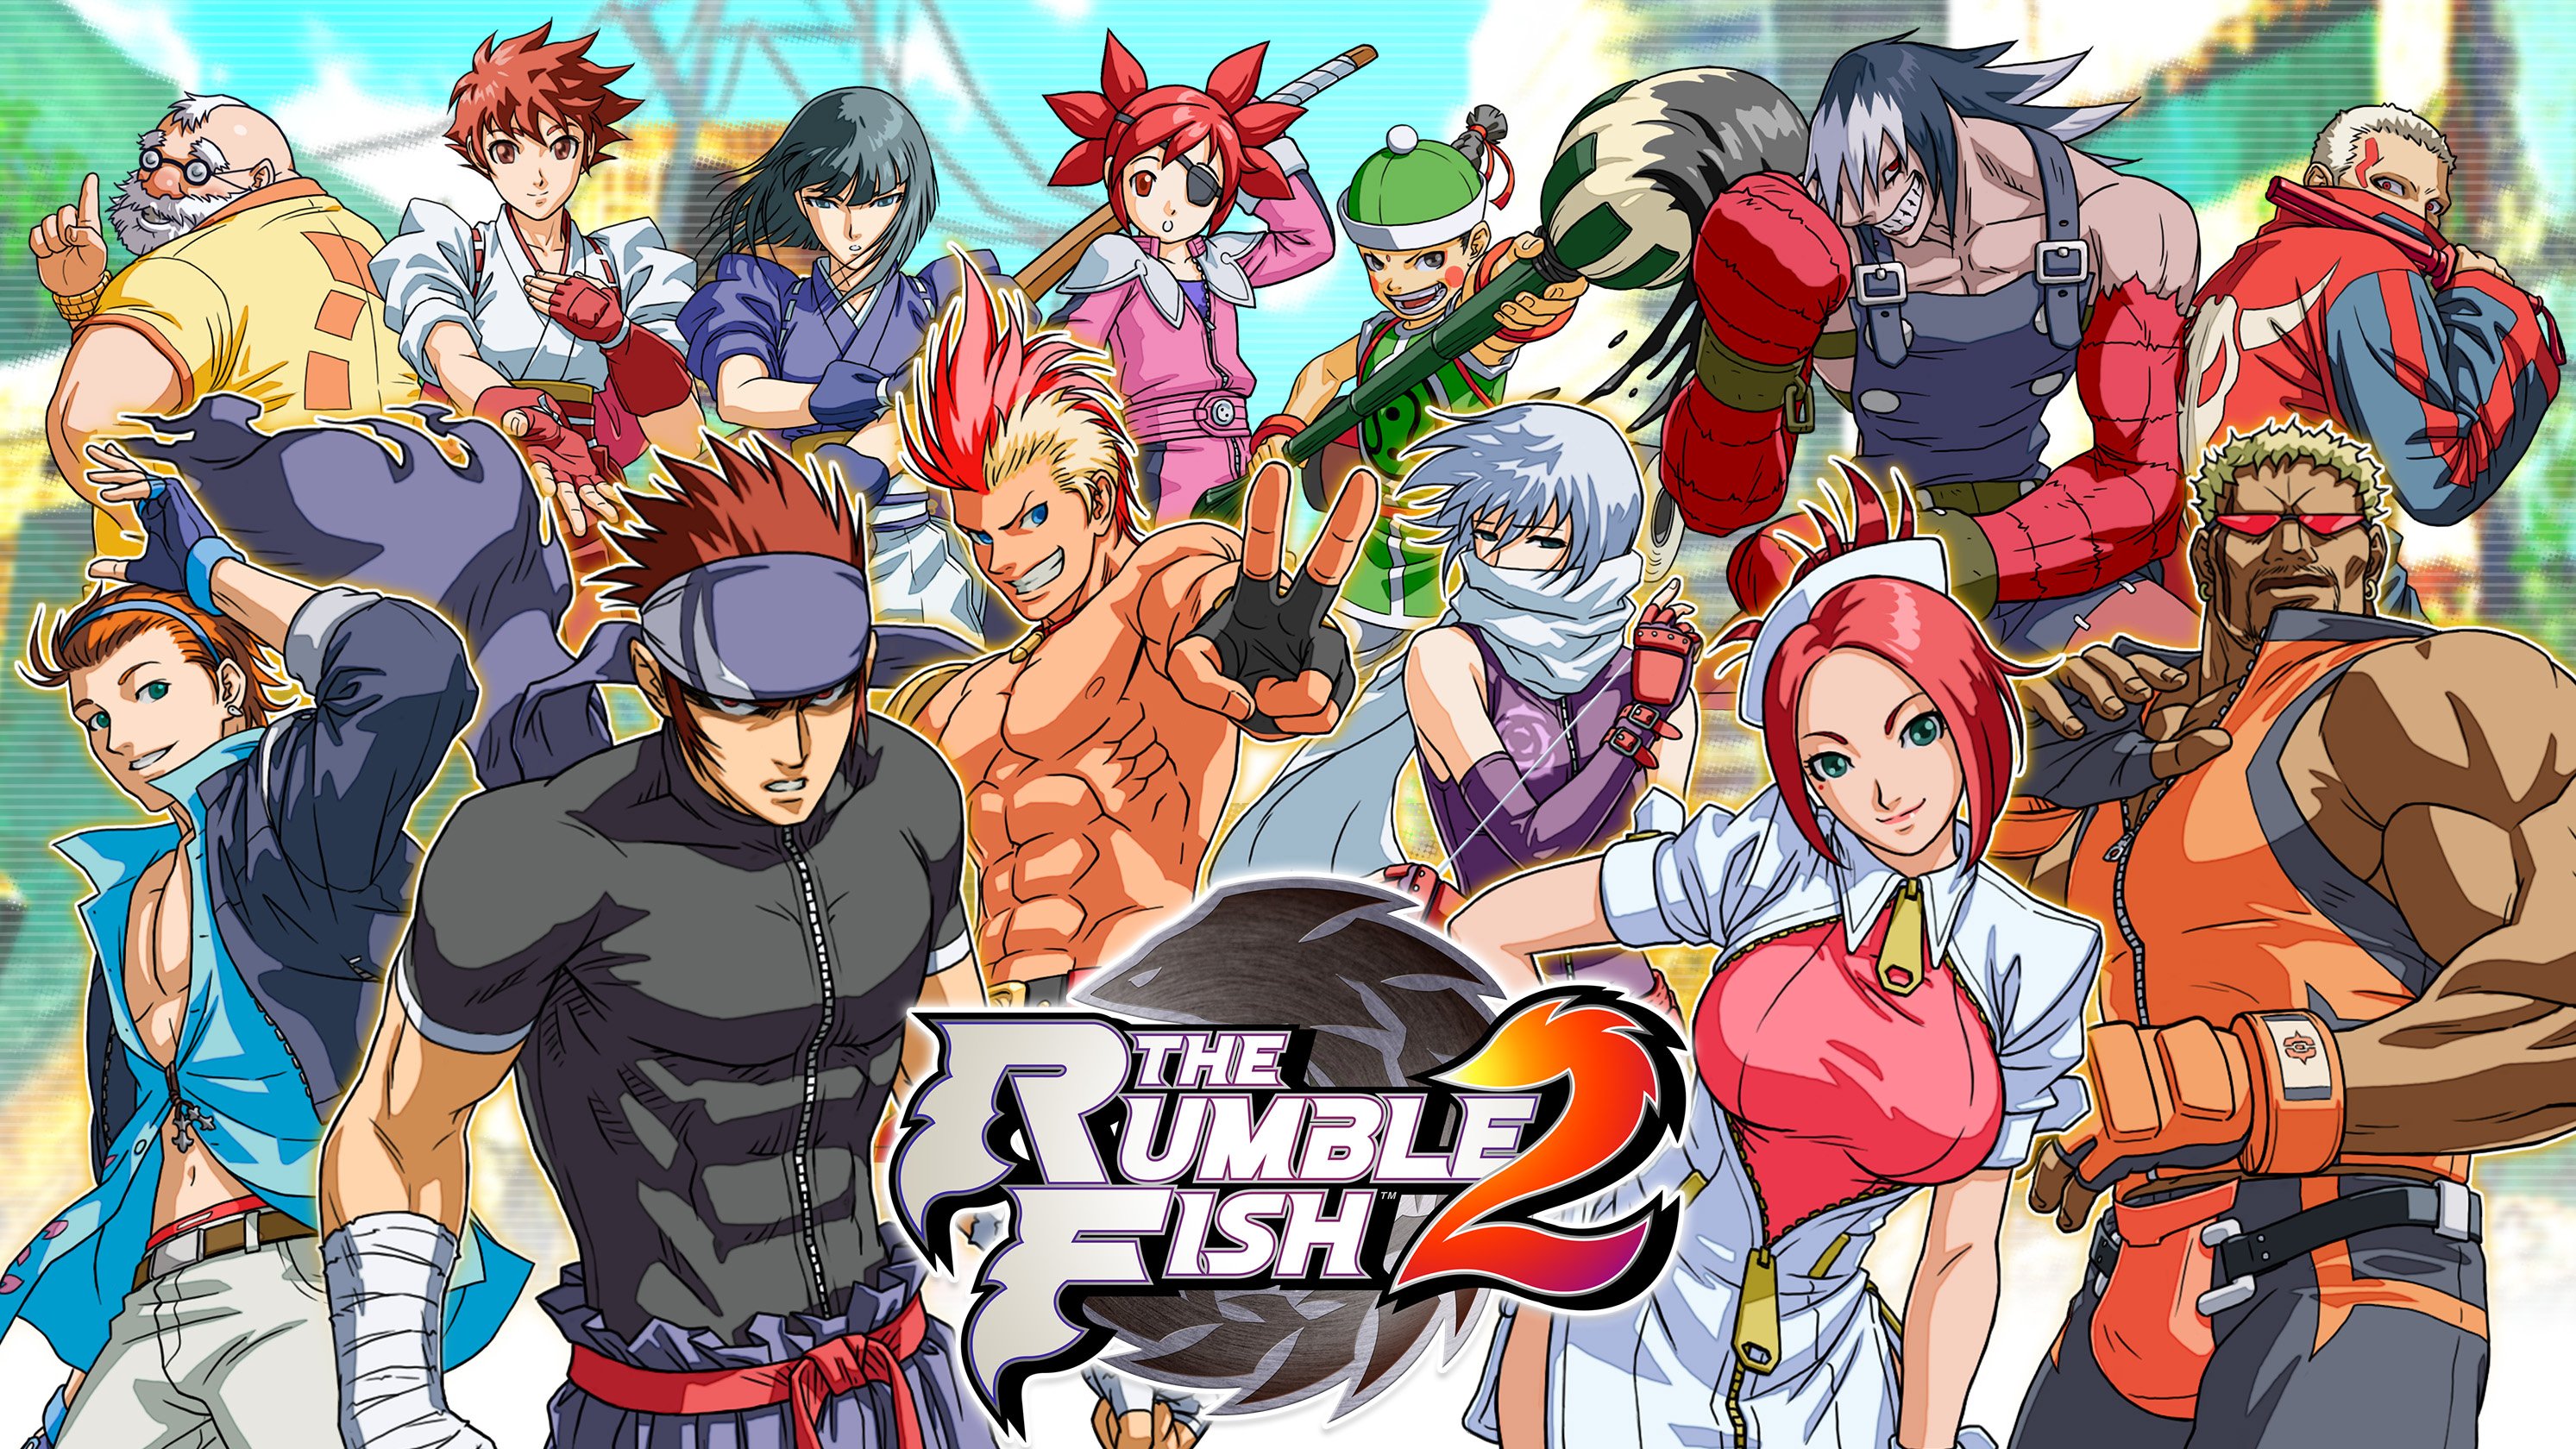 The Rumble Fish 2 launches this winter for PS5, Xbox Series, PS4, Xbox One, Switch, and PC